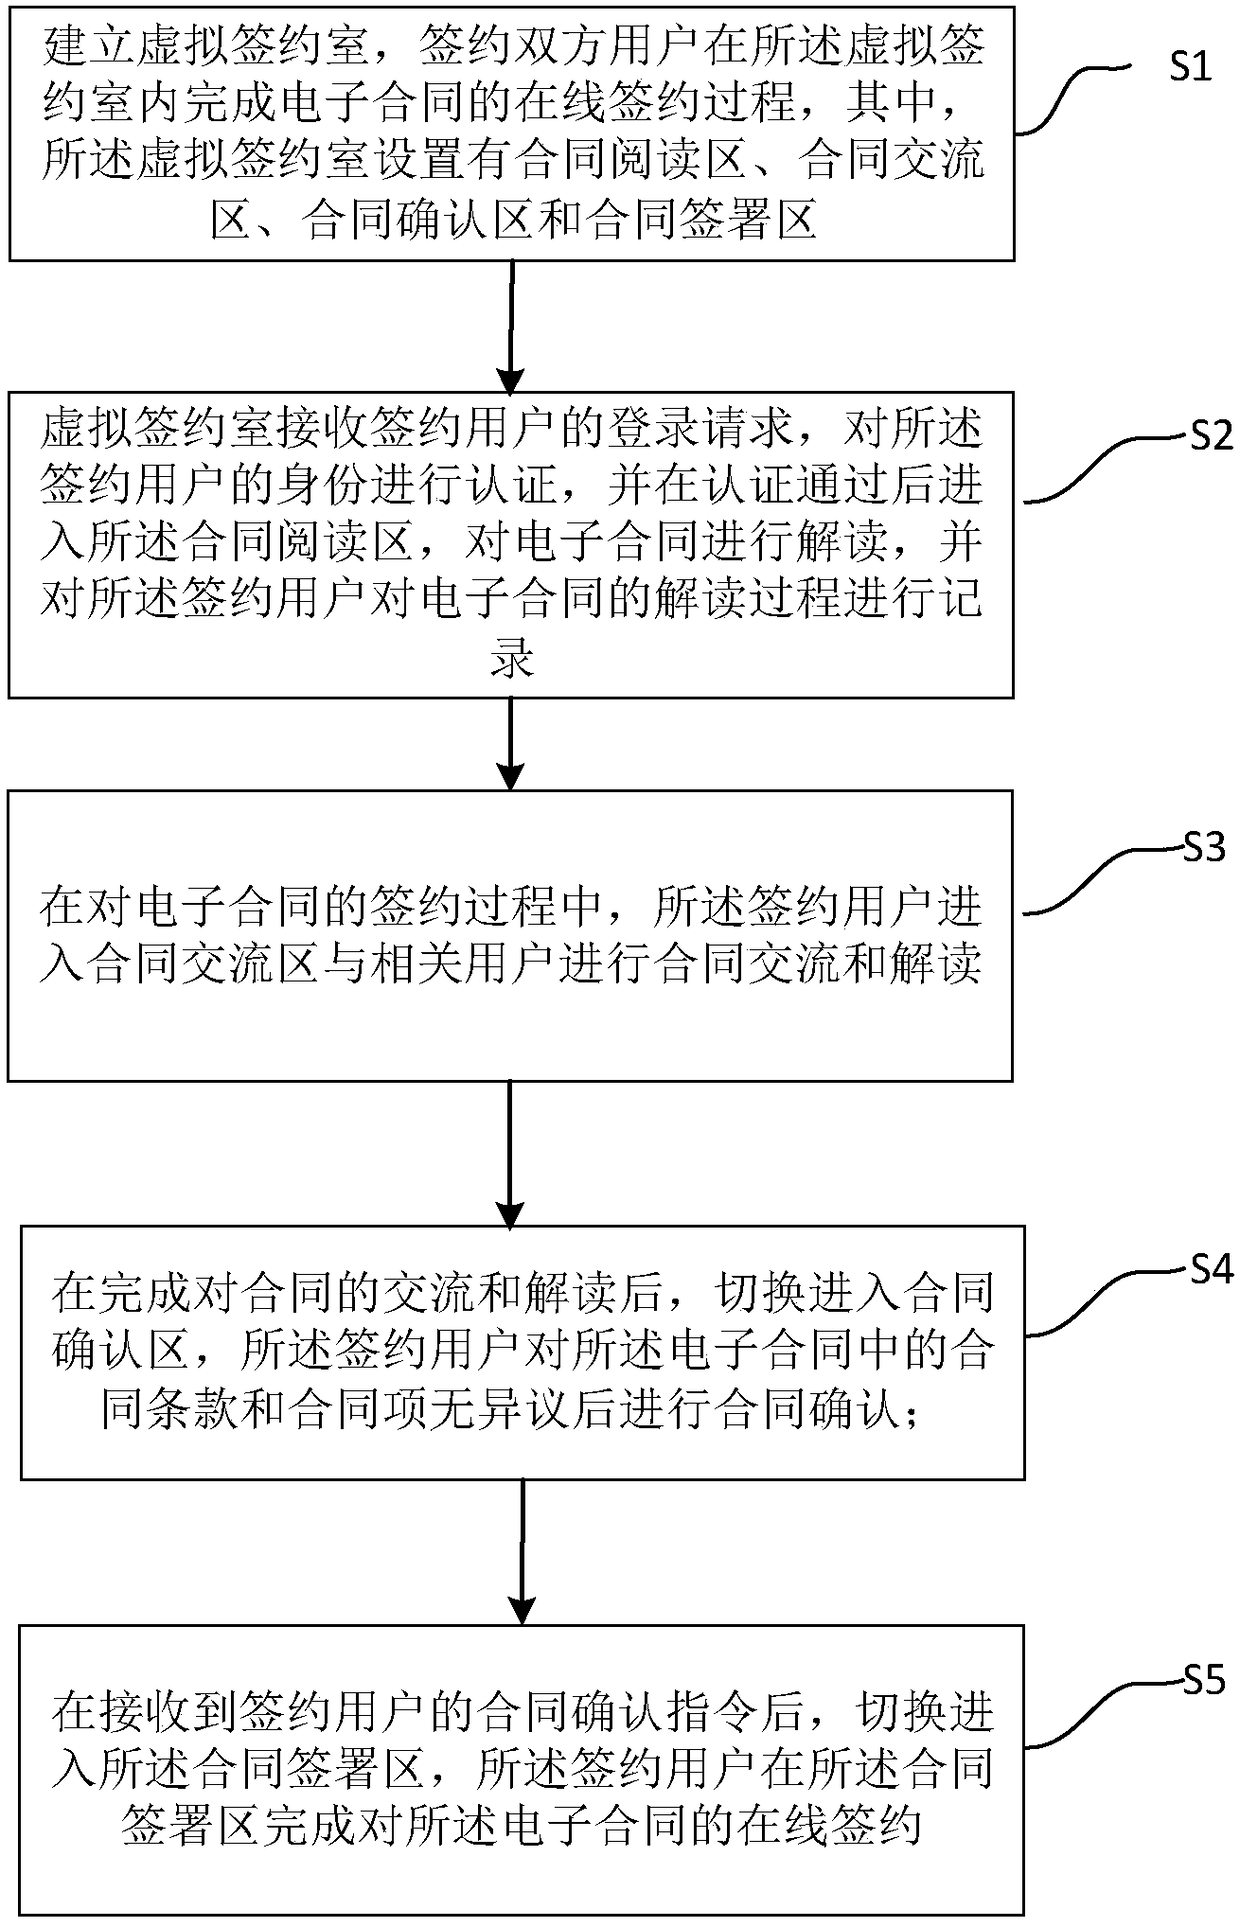 Electronic contract online signing process action recording method